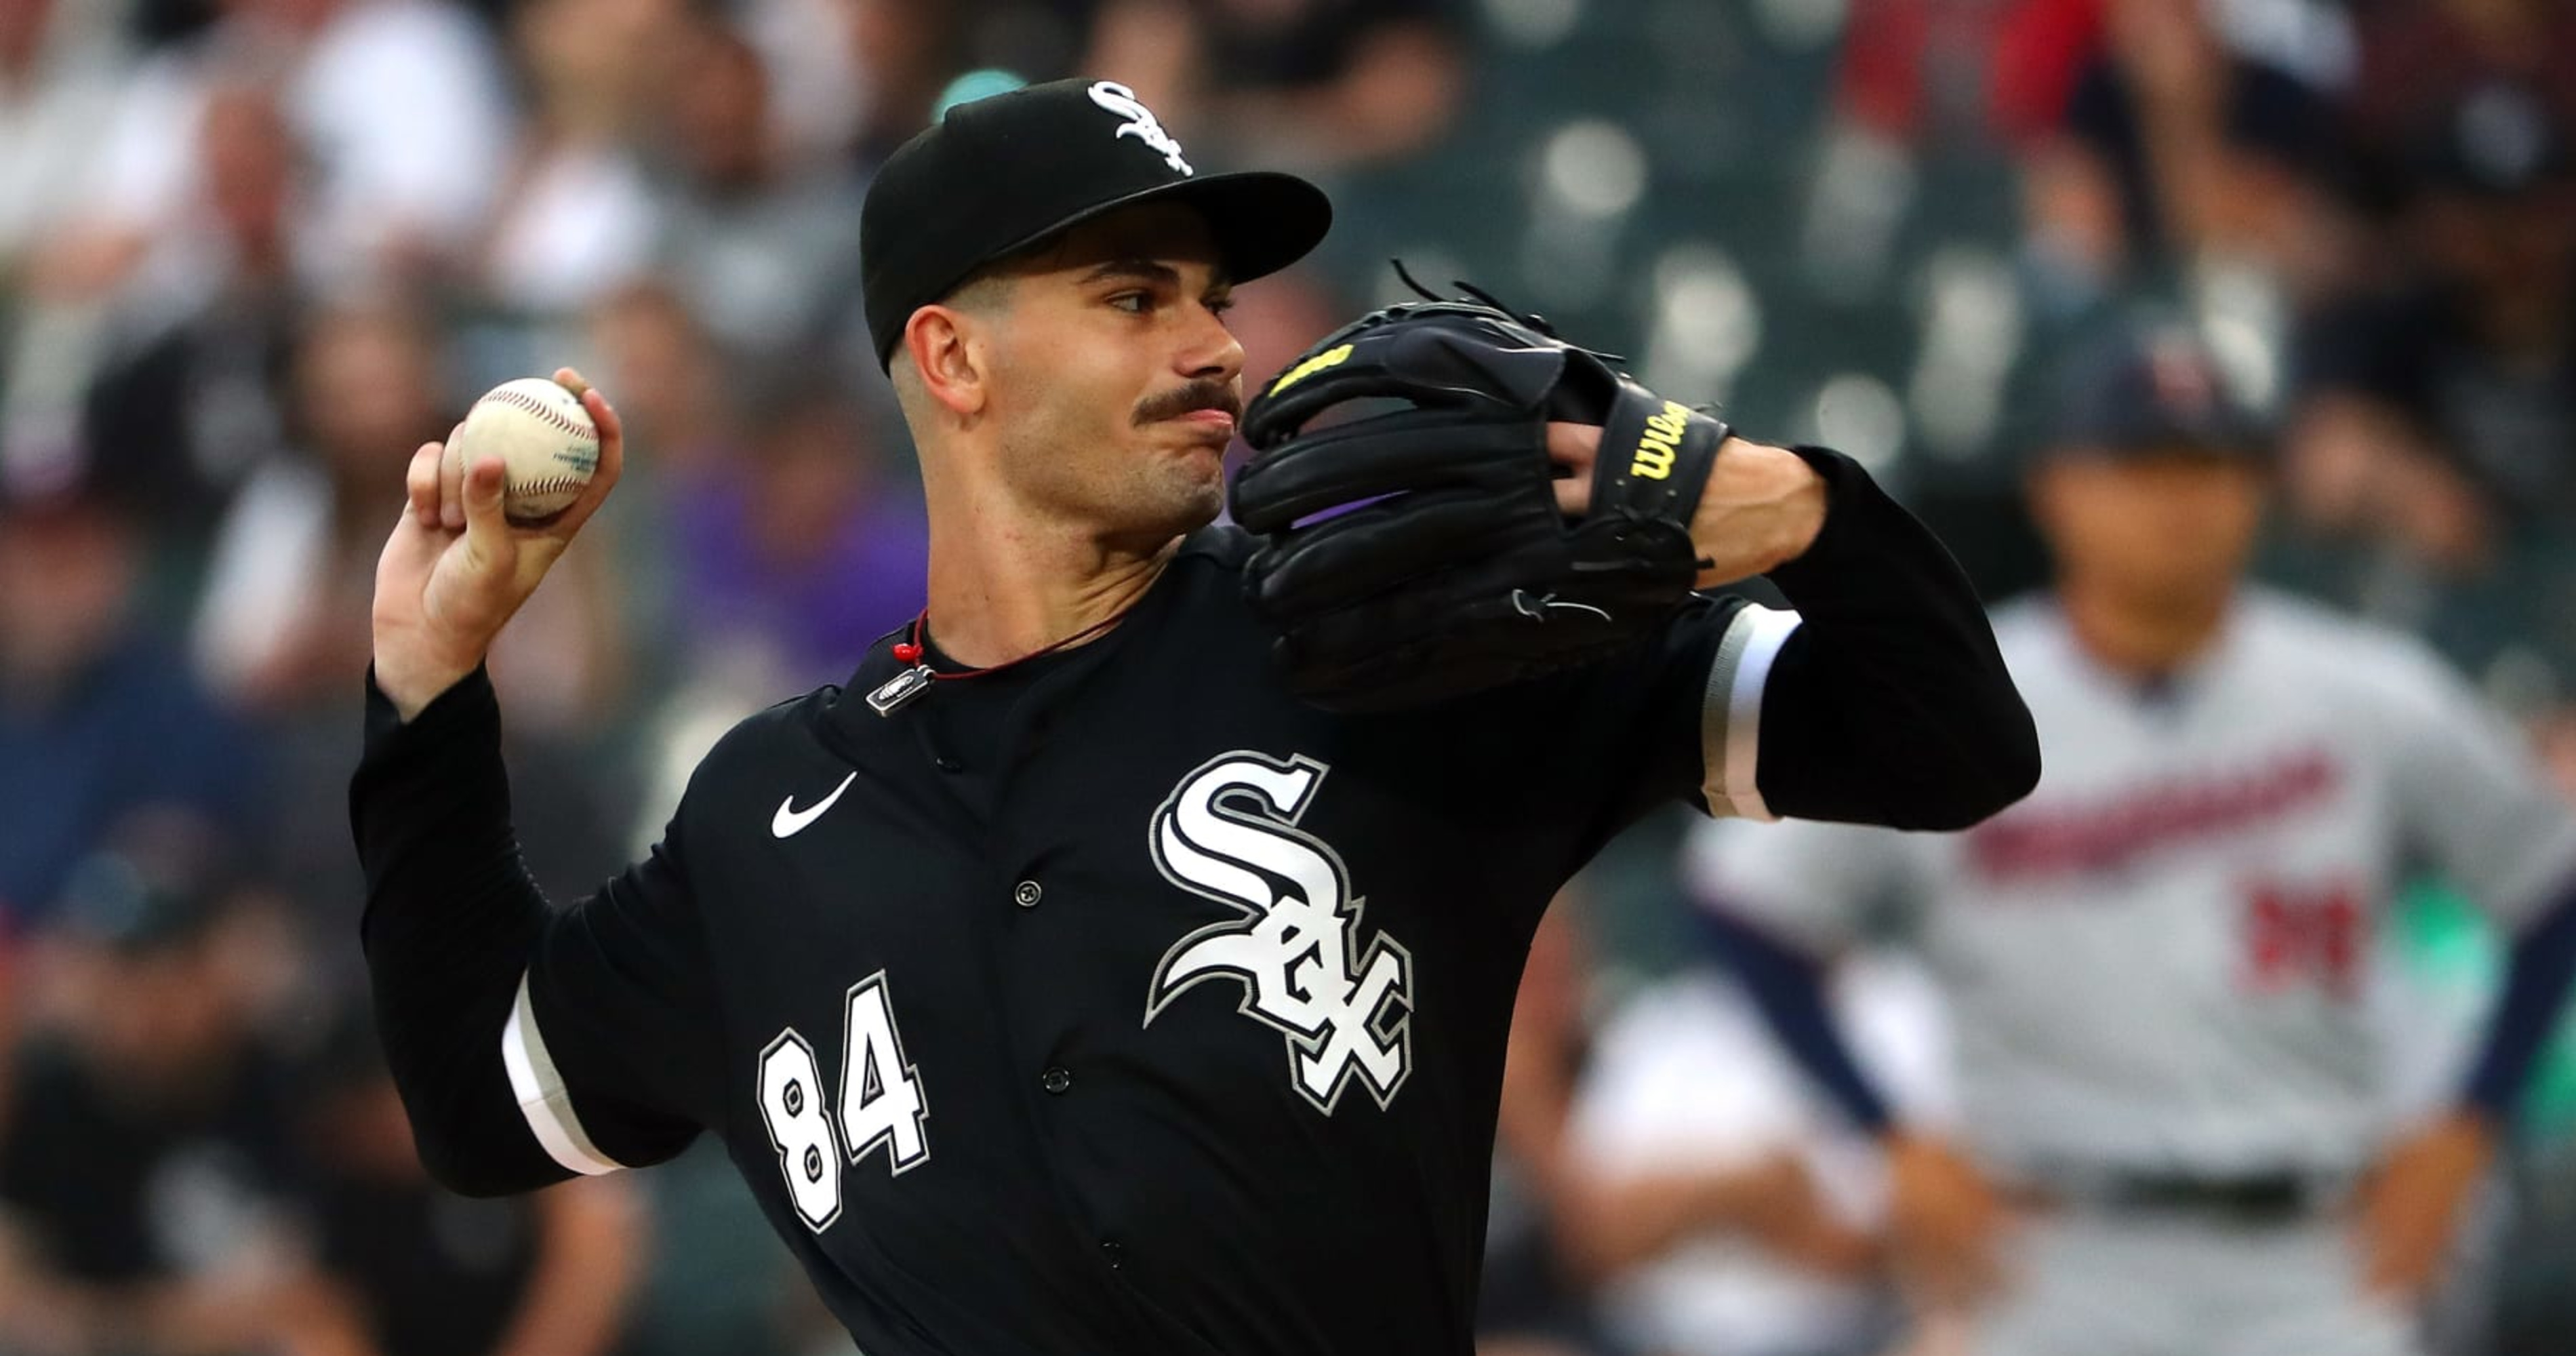 White Sox ace Dylan Cease comes of age - Chicago Sun-Times